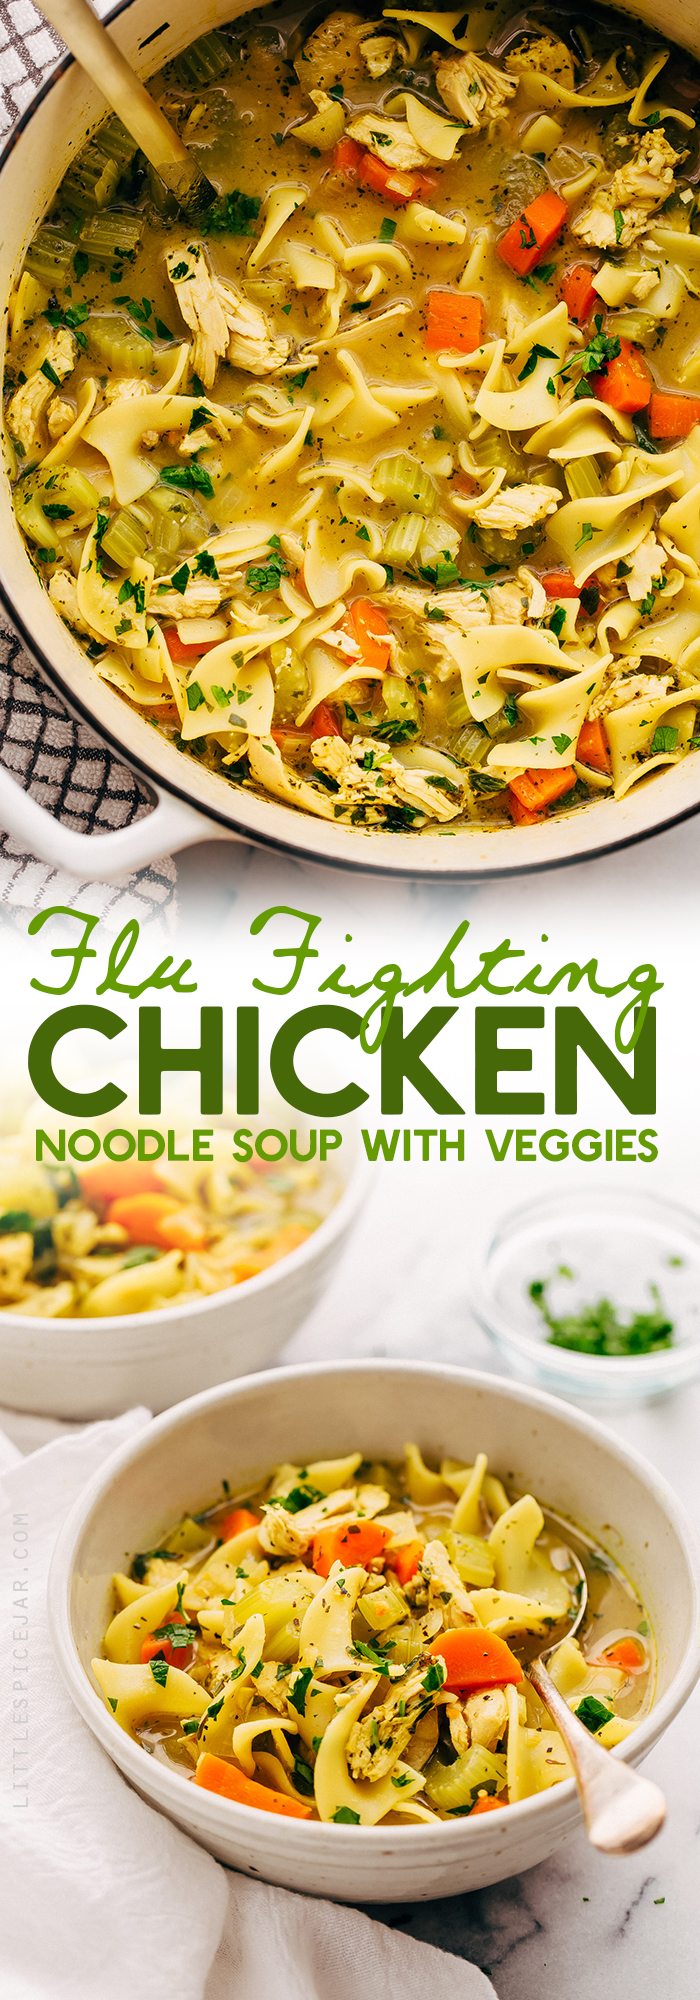 Flu-Fighting Chicken Noodle Soup - Made with ingredients that help fight the flu faster! #chickennoodlesoup #chickennoodle #flufighterchickennoodlesoup #flufighterchickennoodlesoup #chickensoup | Littlespicejar.com